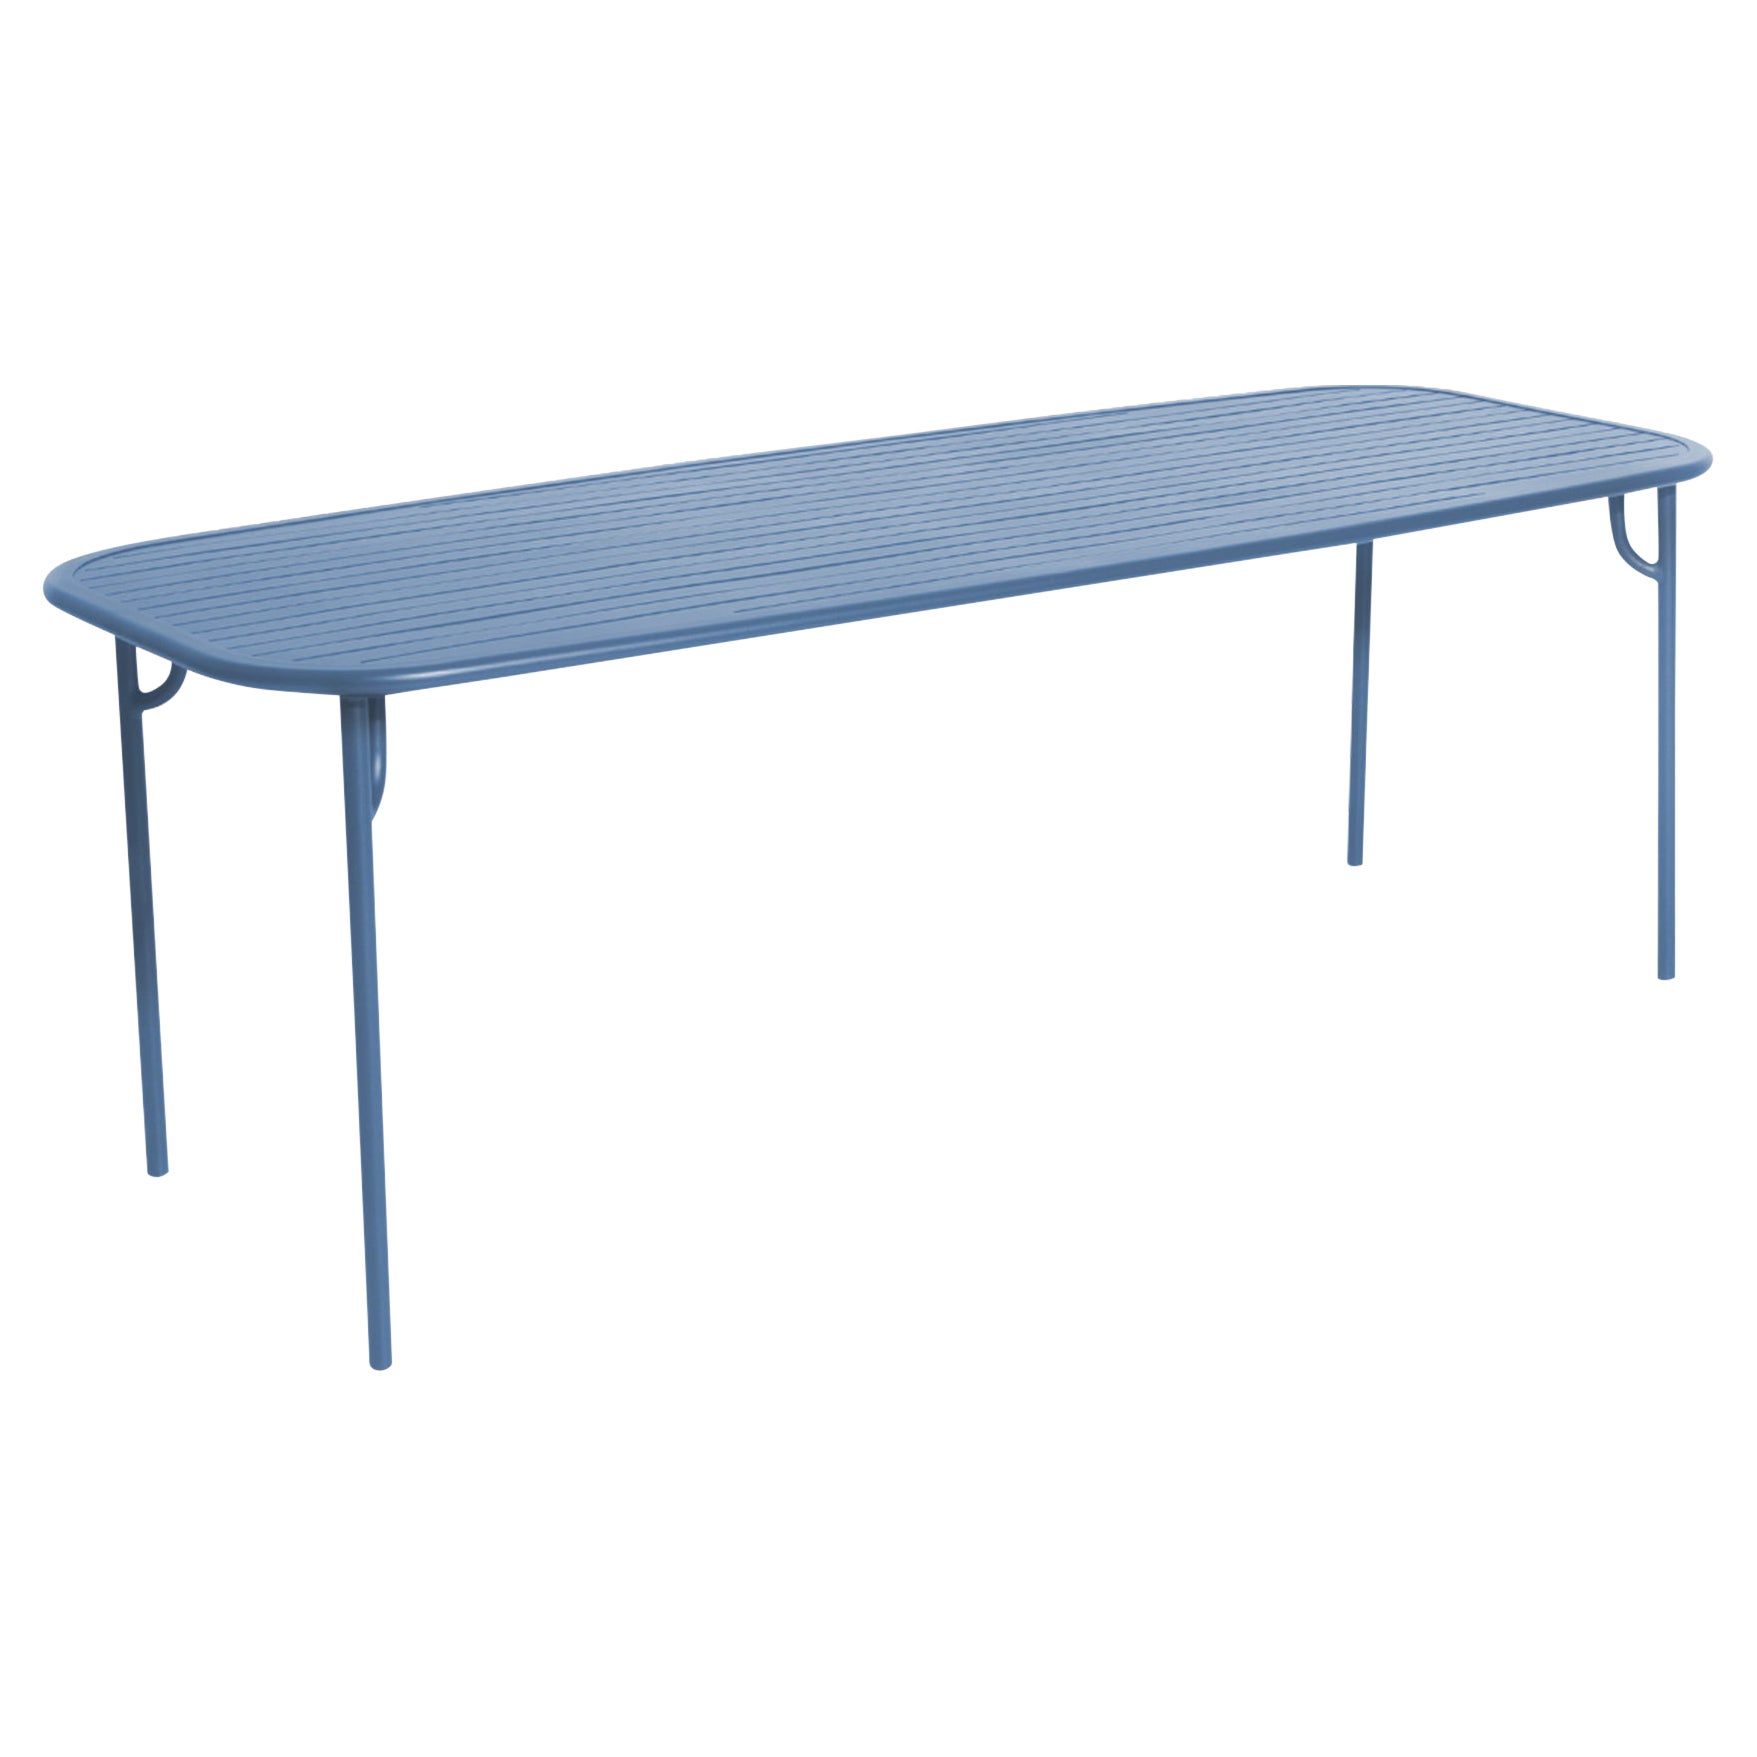 Petite Friture Week-End Large Rectangular Dining Table in Azur Blue with Slats For Sale